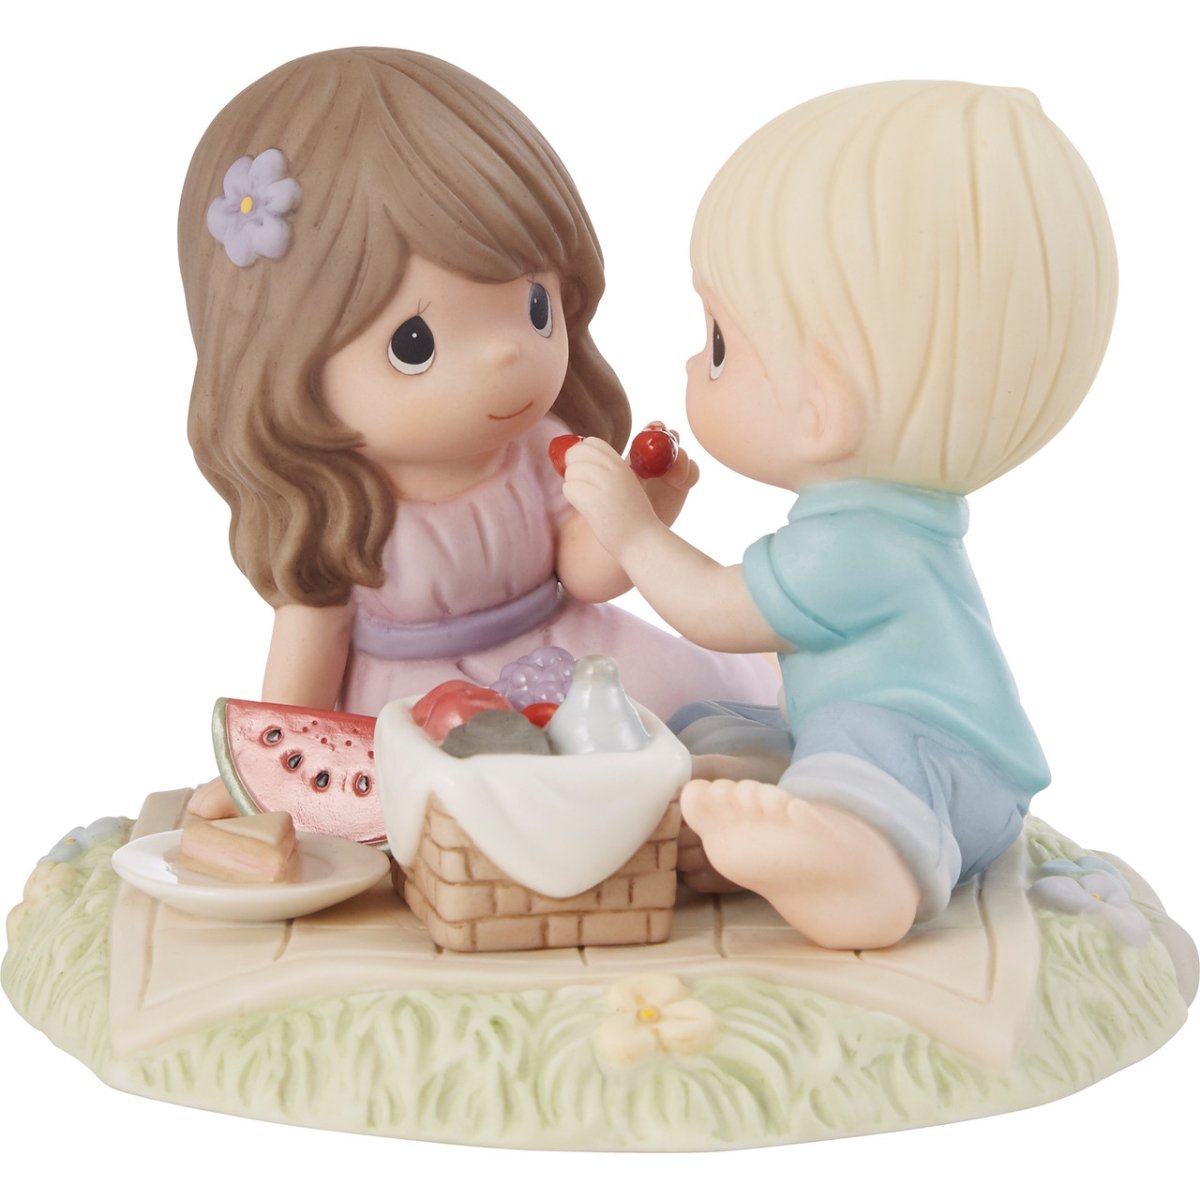 Picture of Be the Light Christian Bookstore 212004 Porcelain Couple Figurine with Picnic Basket, White